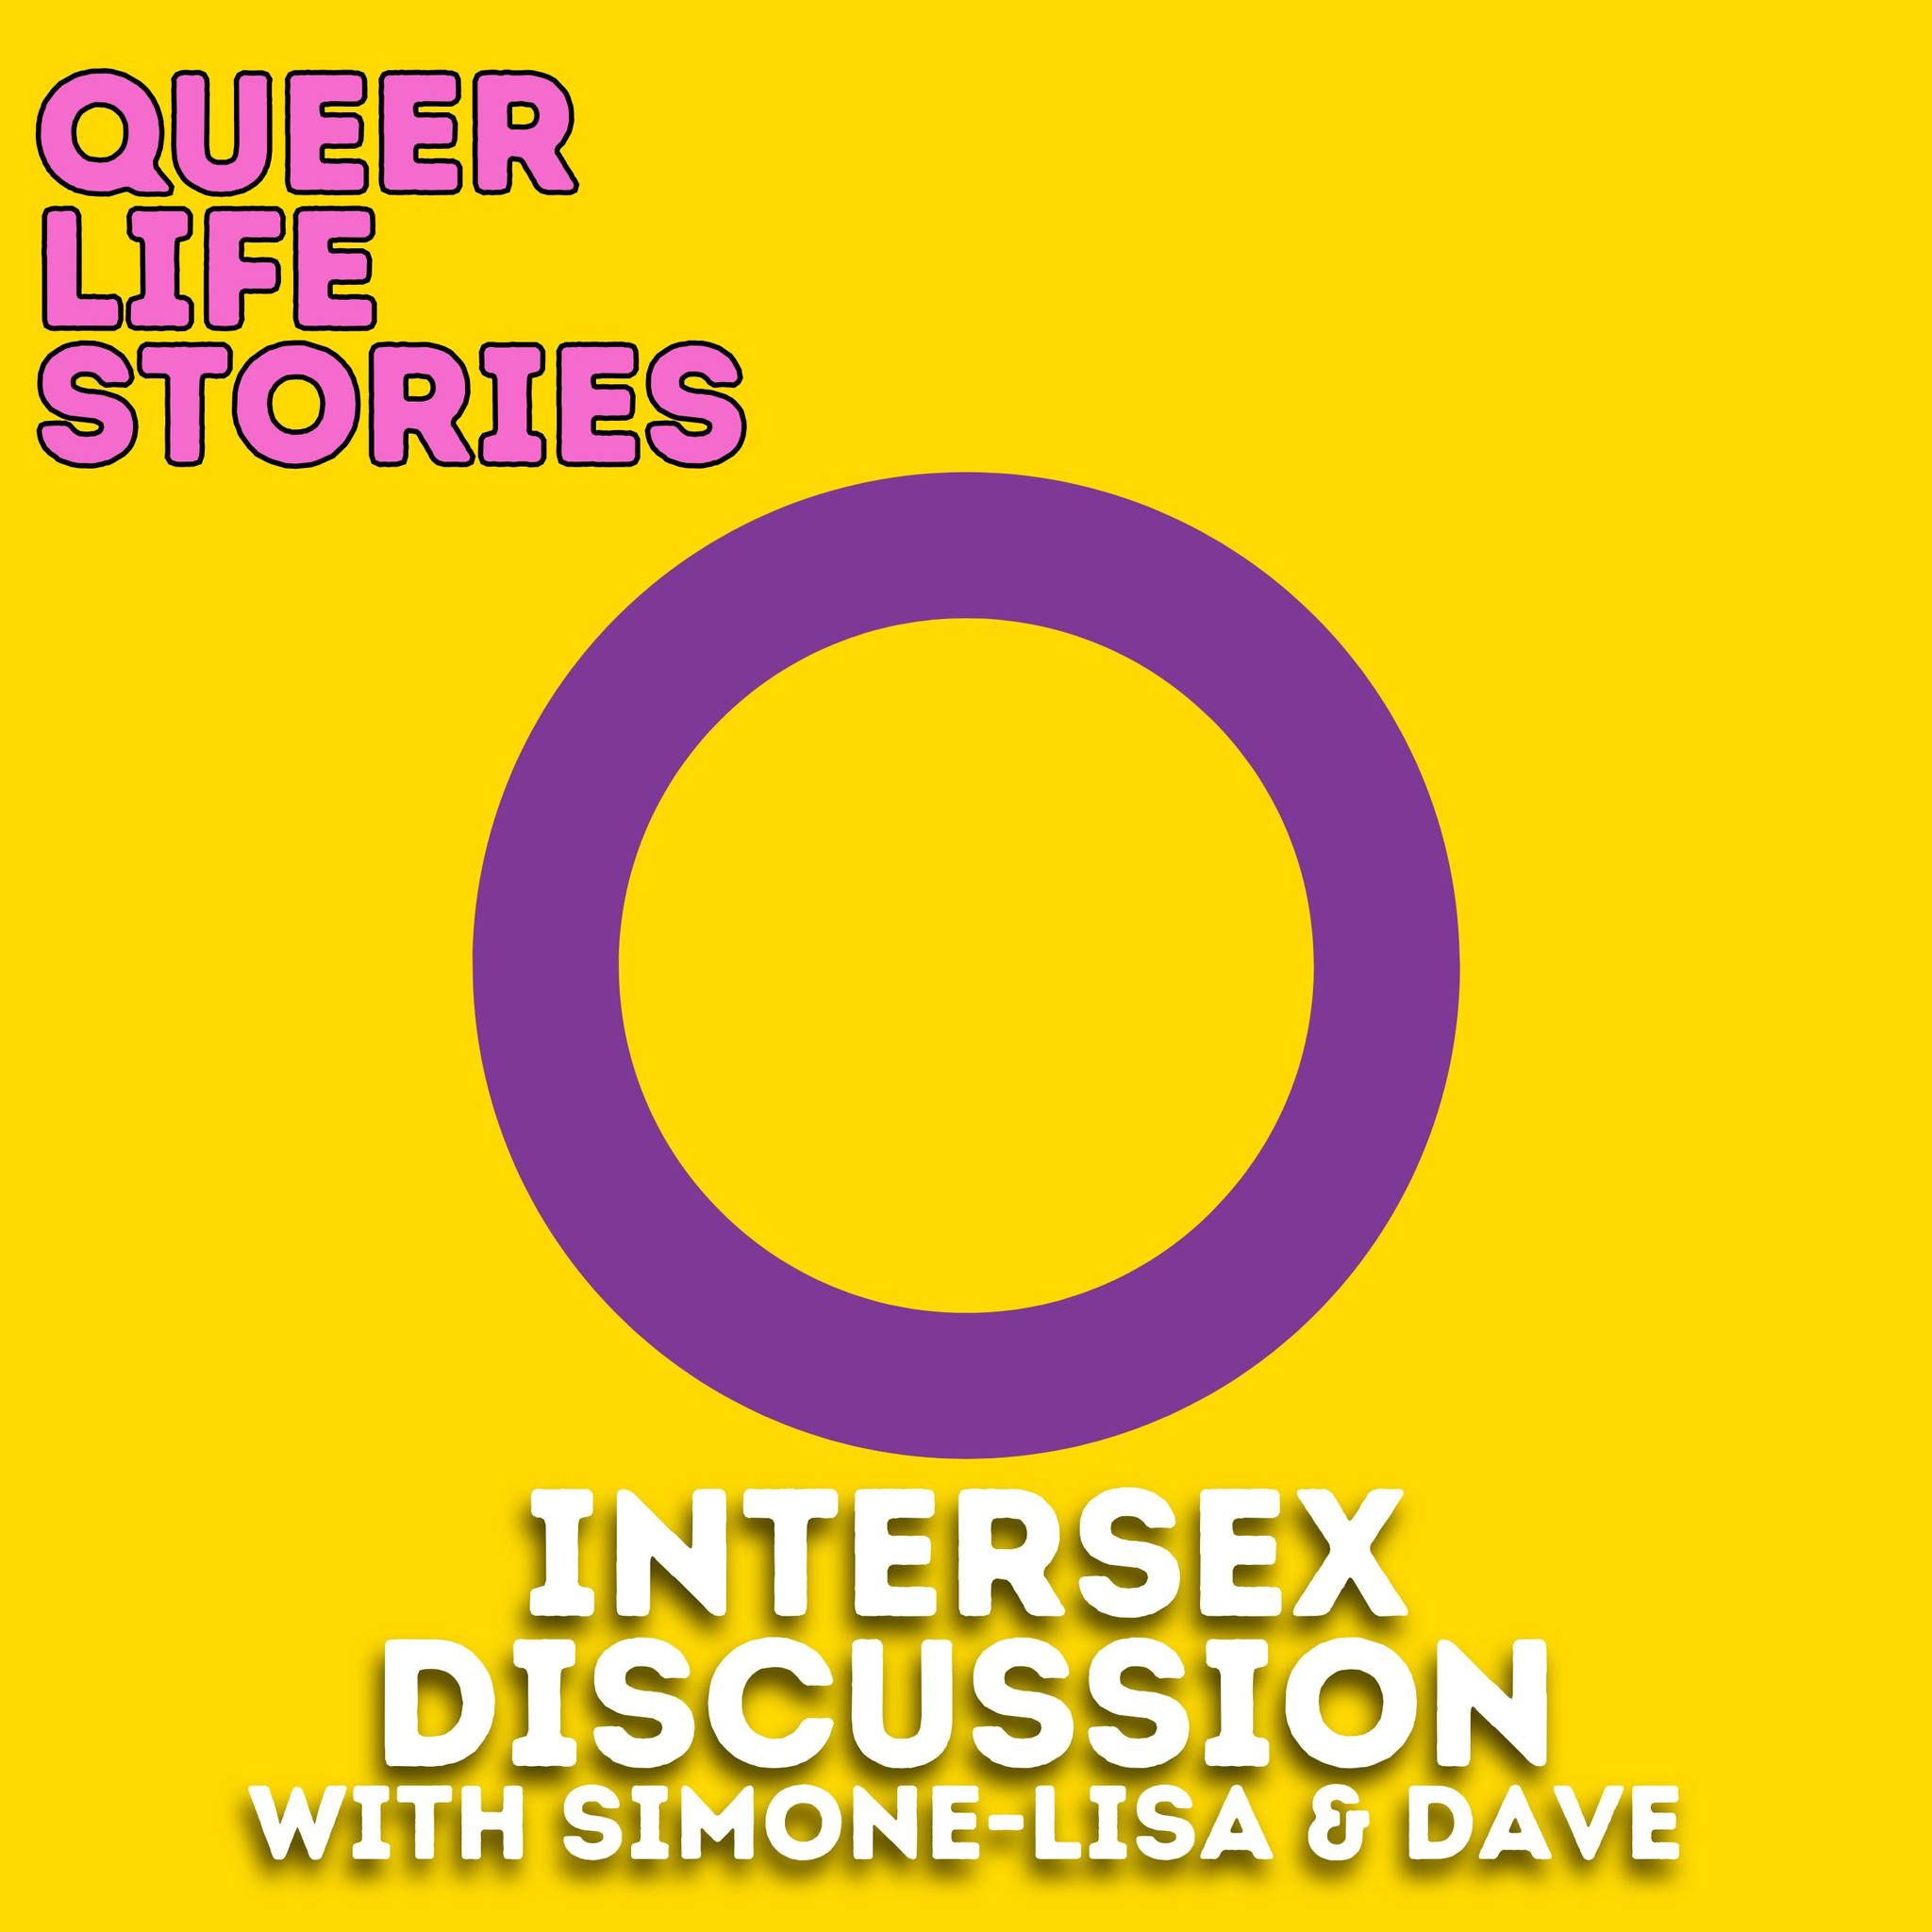 A yellow tile with a purple open circle and text QUEER LIFE STORIES in the top left corner. Below the circle in white text are the words INTERSEX DISCUSSION WITH SIMONE-LISA & DAVE